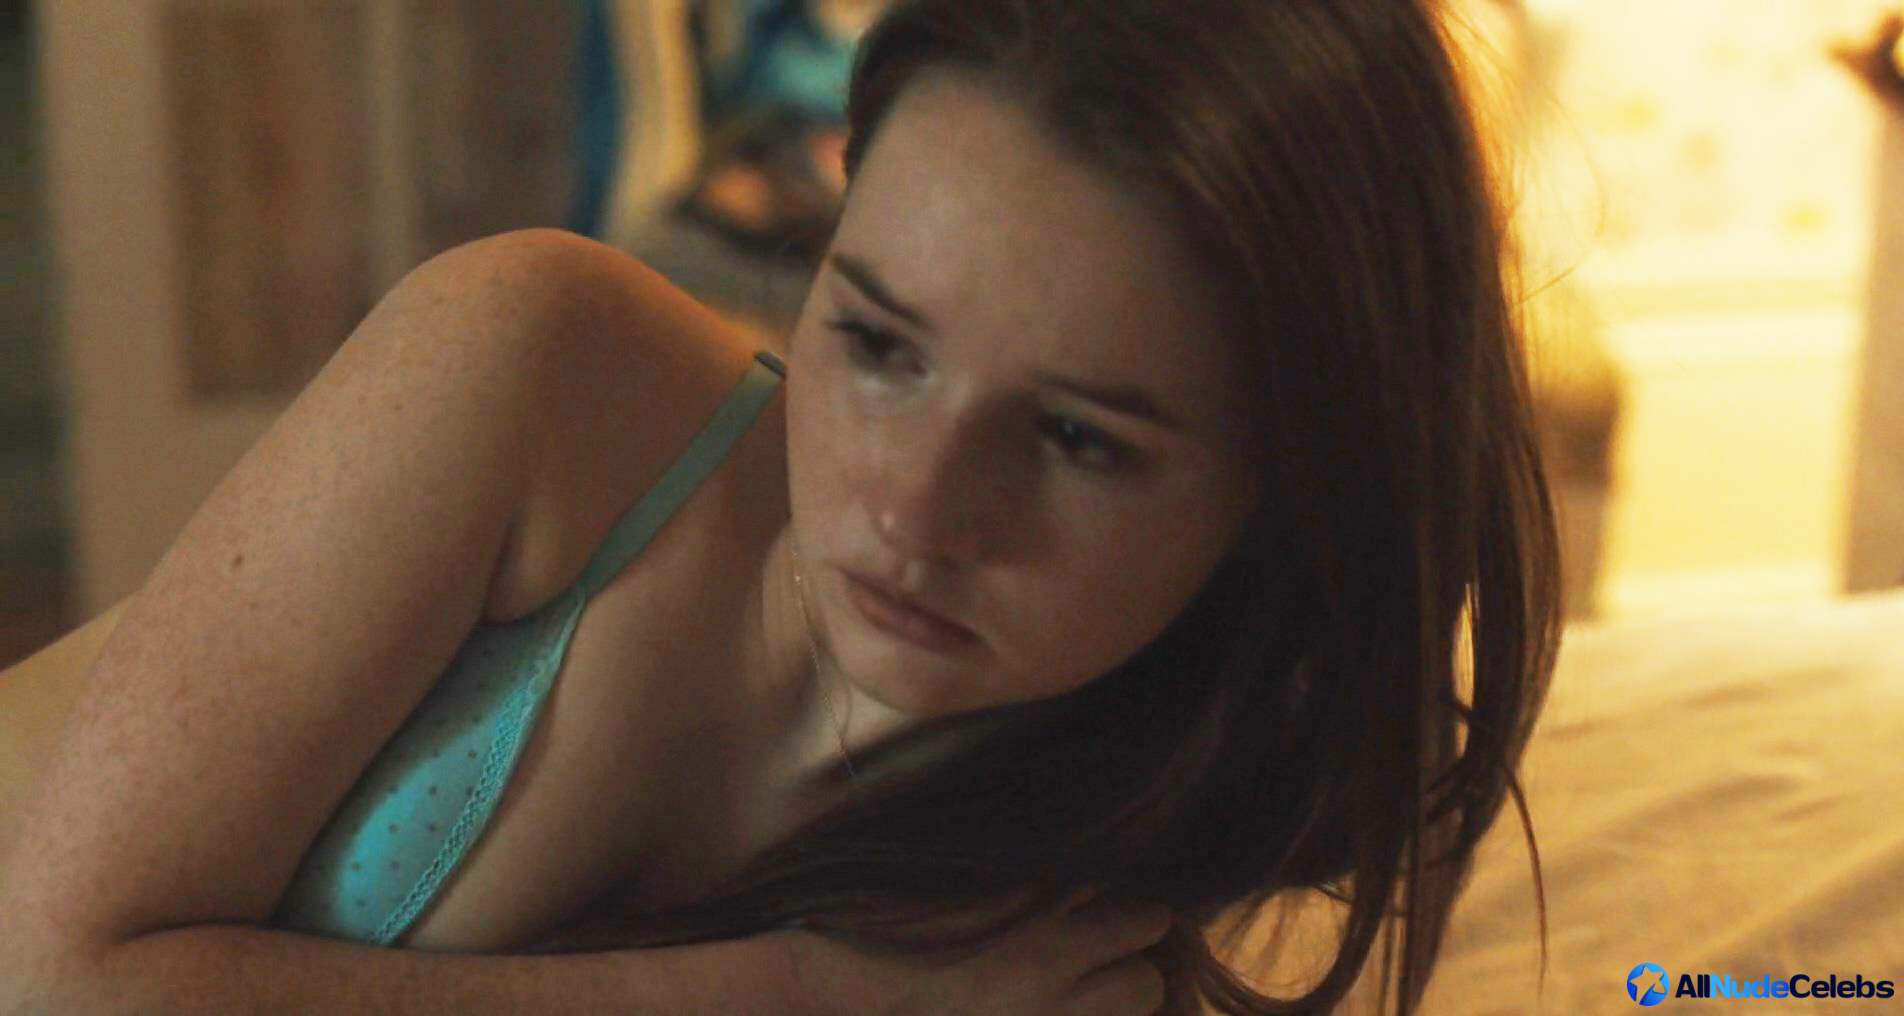 Kaitlyn Dever nude and lesbian sex scenes.